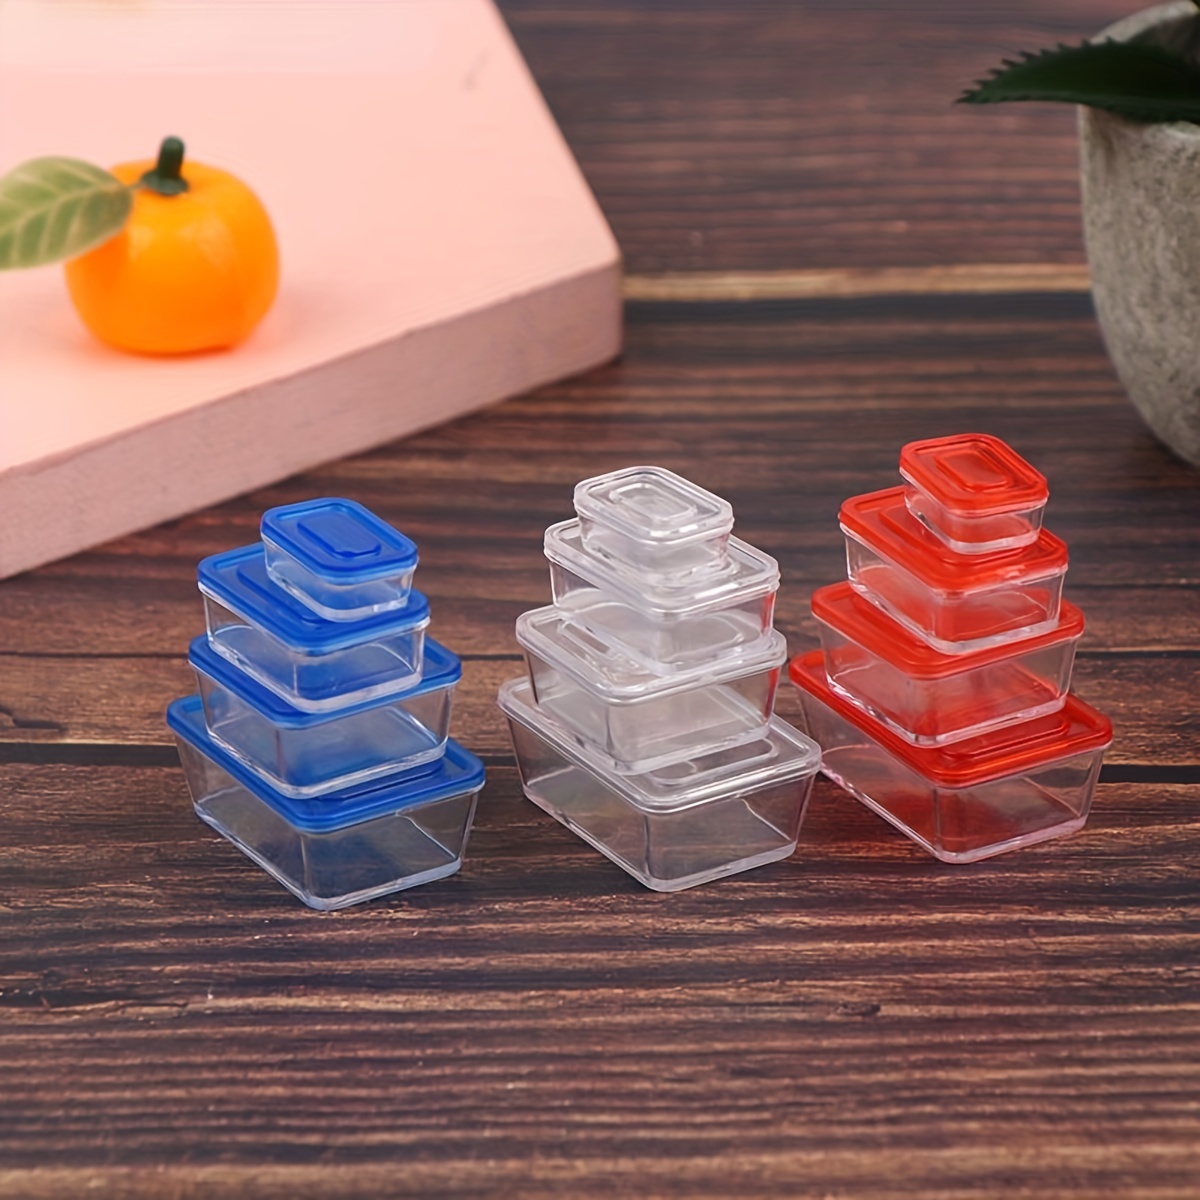 30PC 1:12 Scale Dollhouse Miniature Drink Accessories Wine Bottles Bar Party